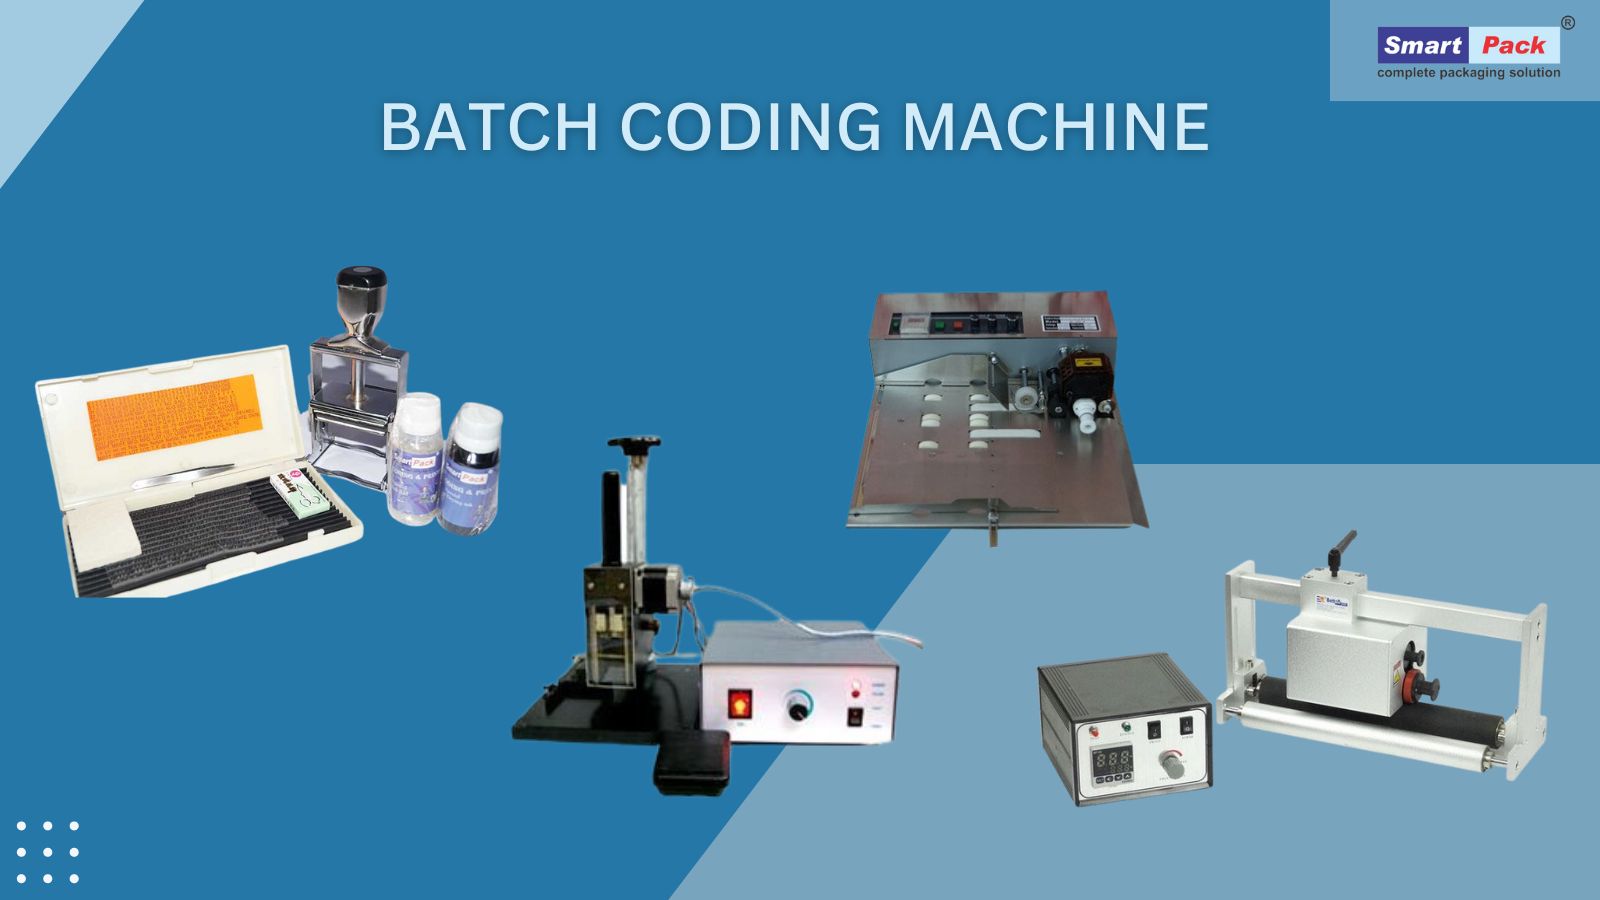 The Benefits of Using Batch Coding Machine for Small Business Owners